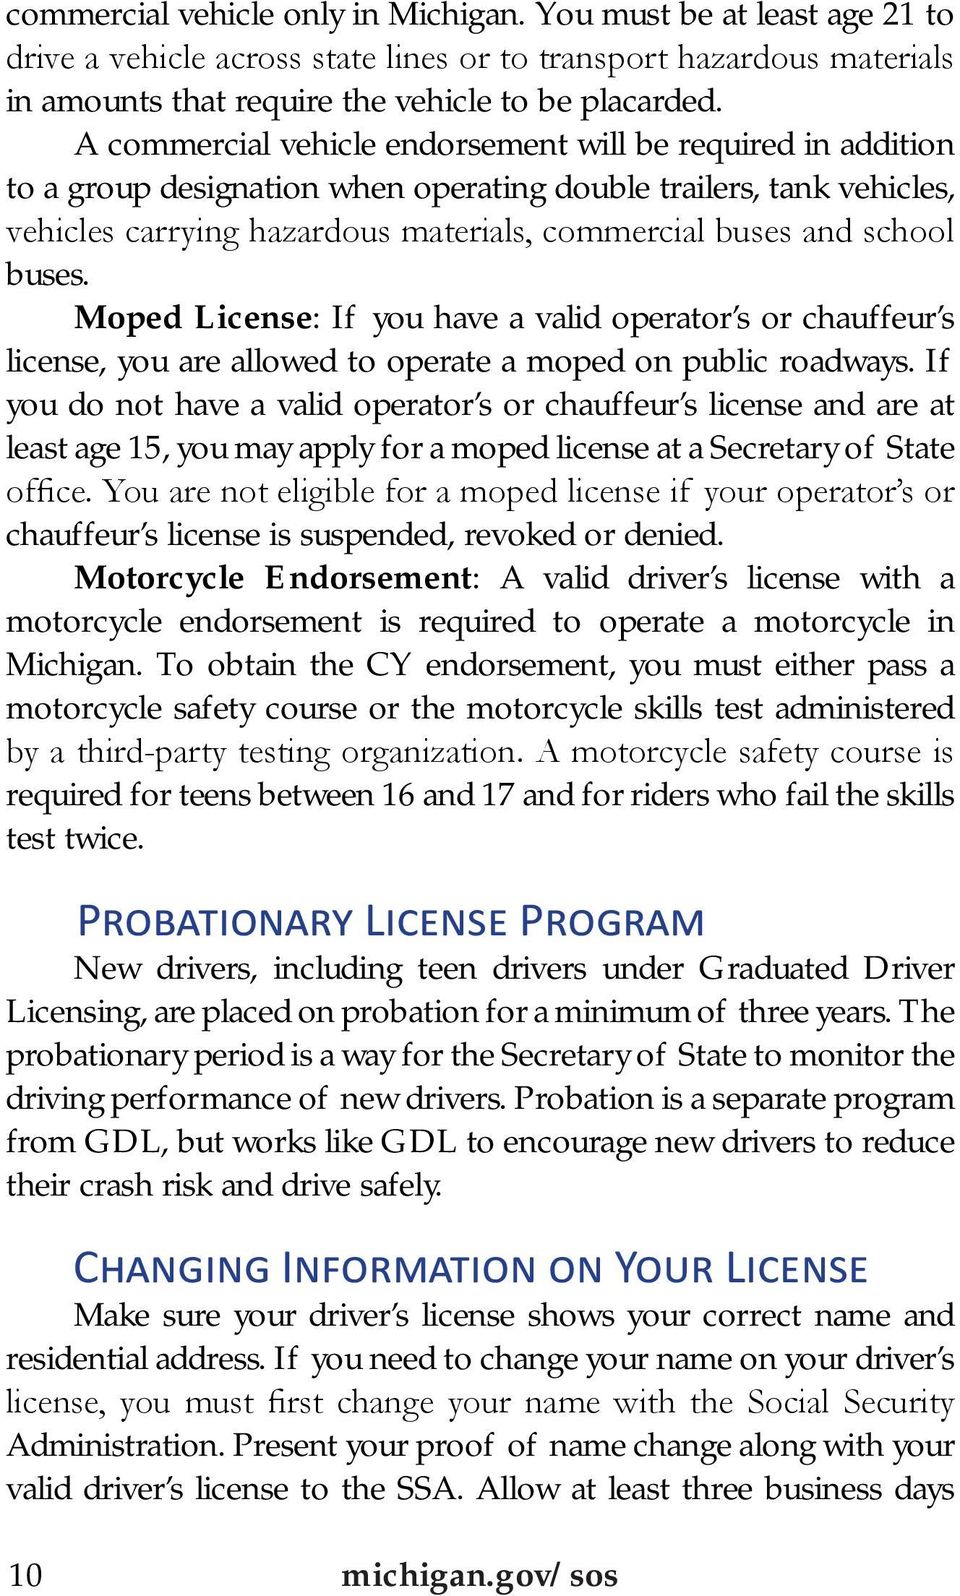 buses. Moped License: If you have a valid operator s or chauffeur s license, you are allowed to operate a moped on public roadways.